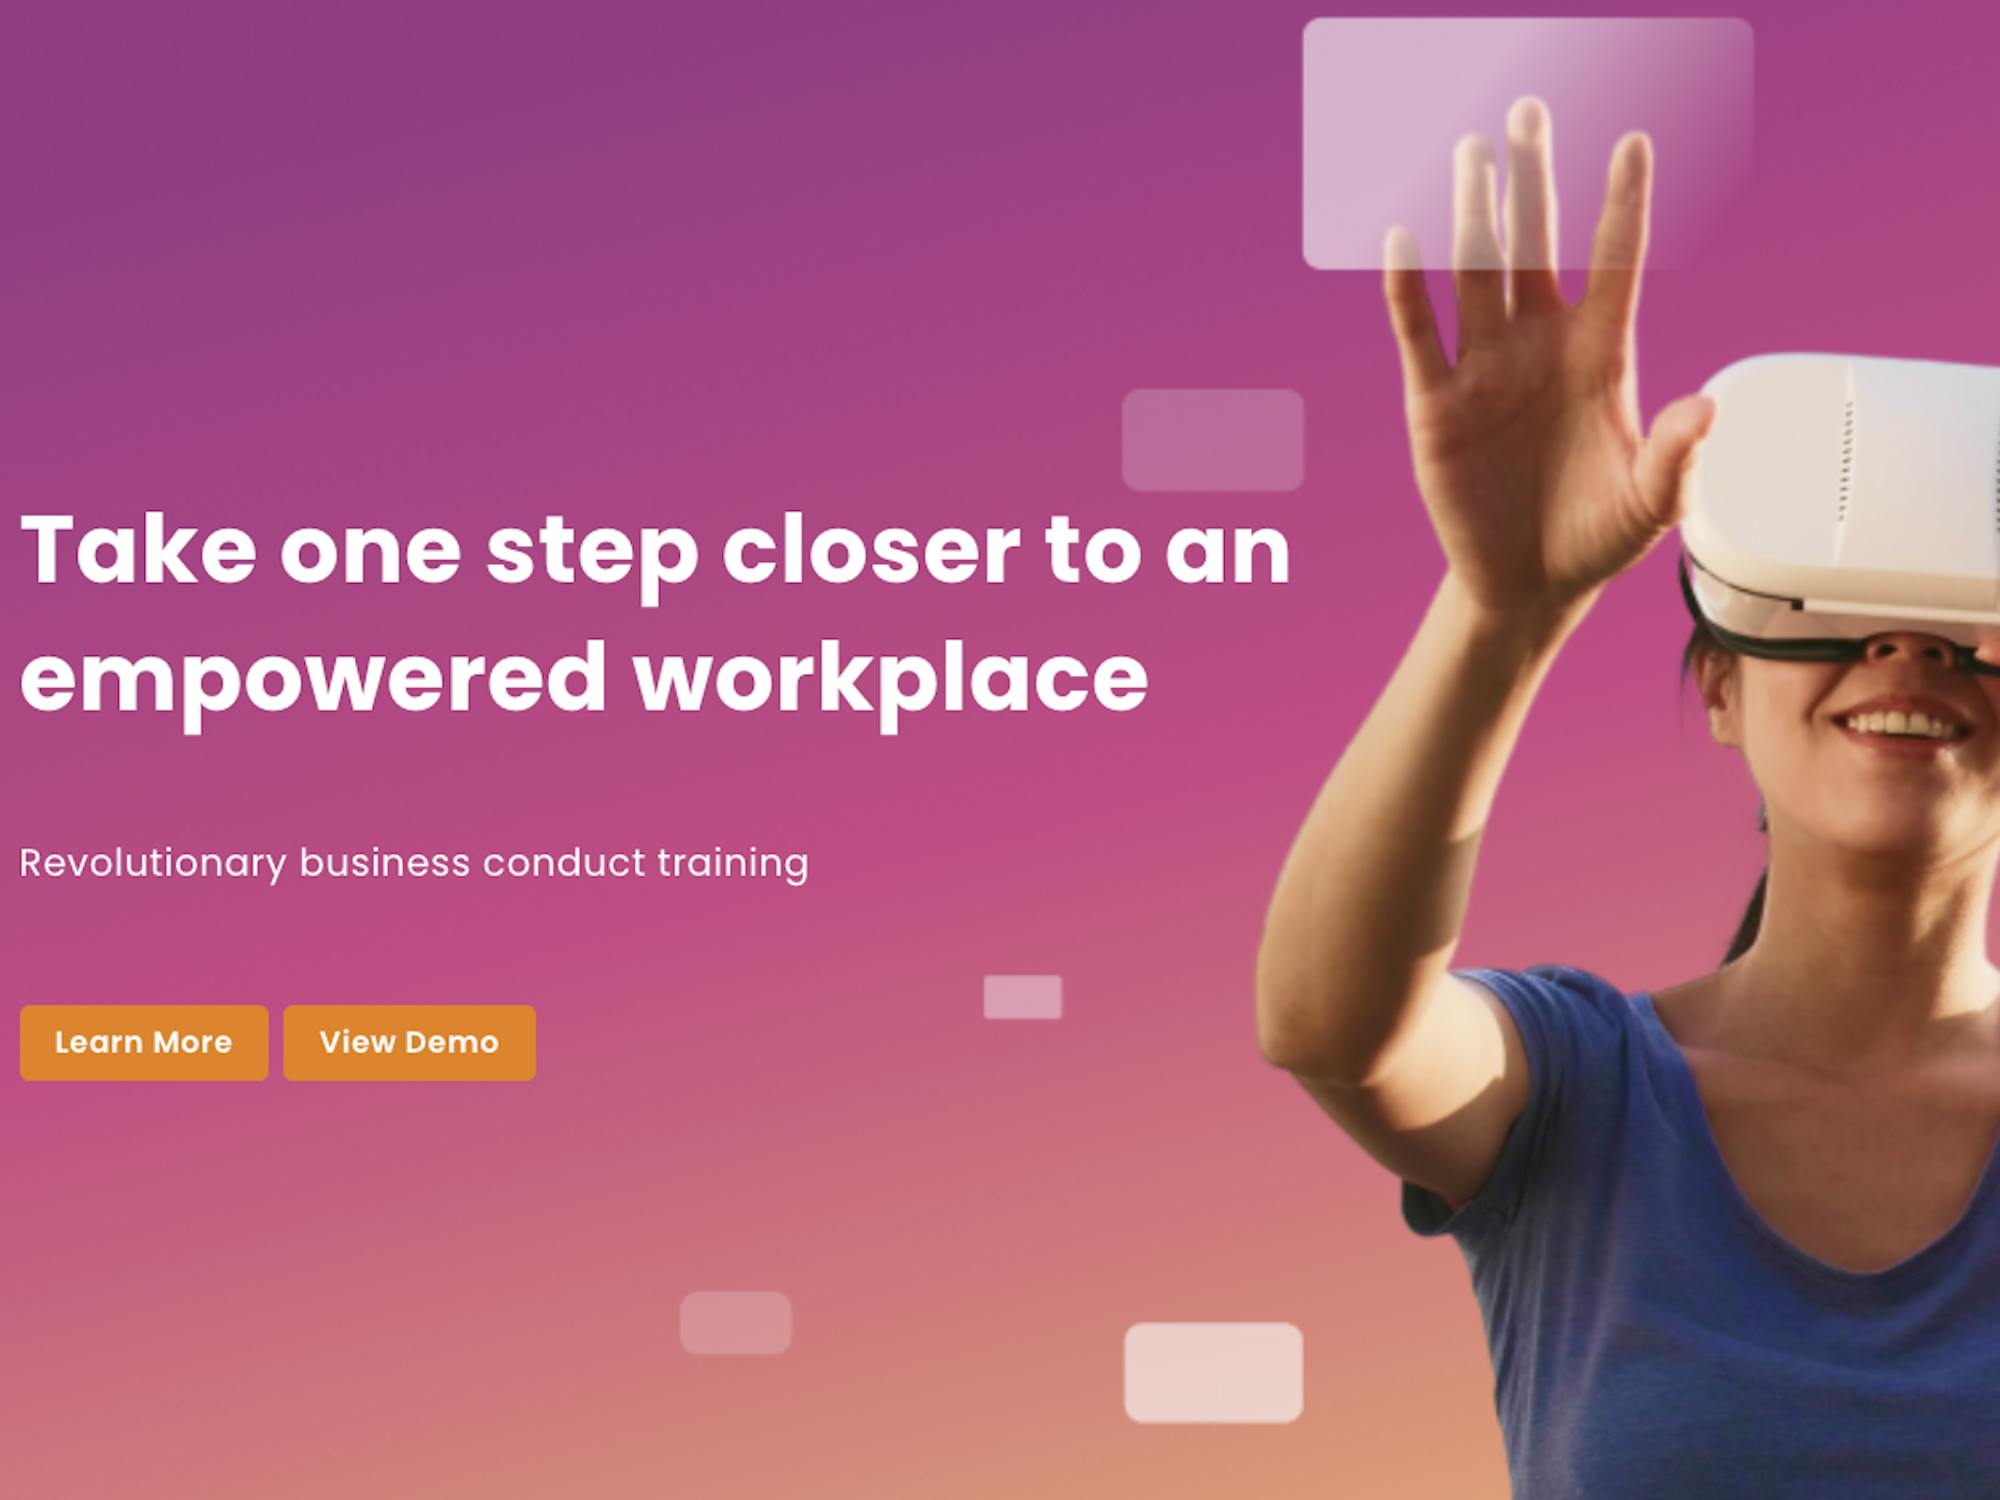 A webpage for a virtual reality company featuring a photo of a woman wearing a headset, text, and buttons for a demo or to learn more. 